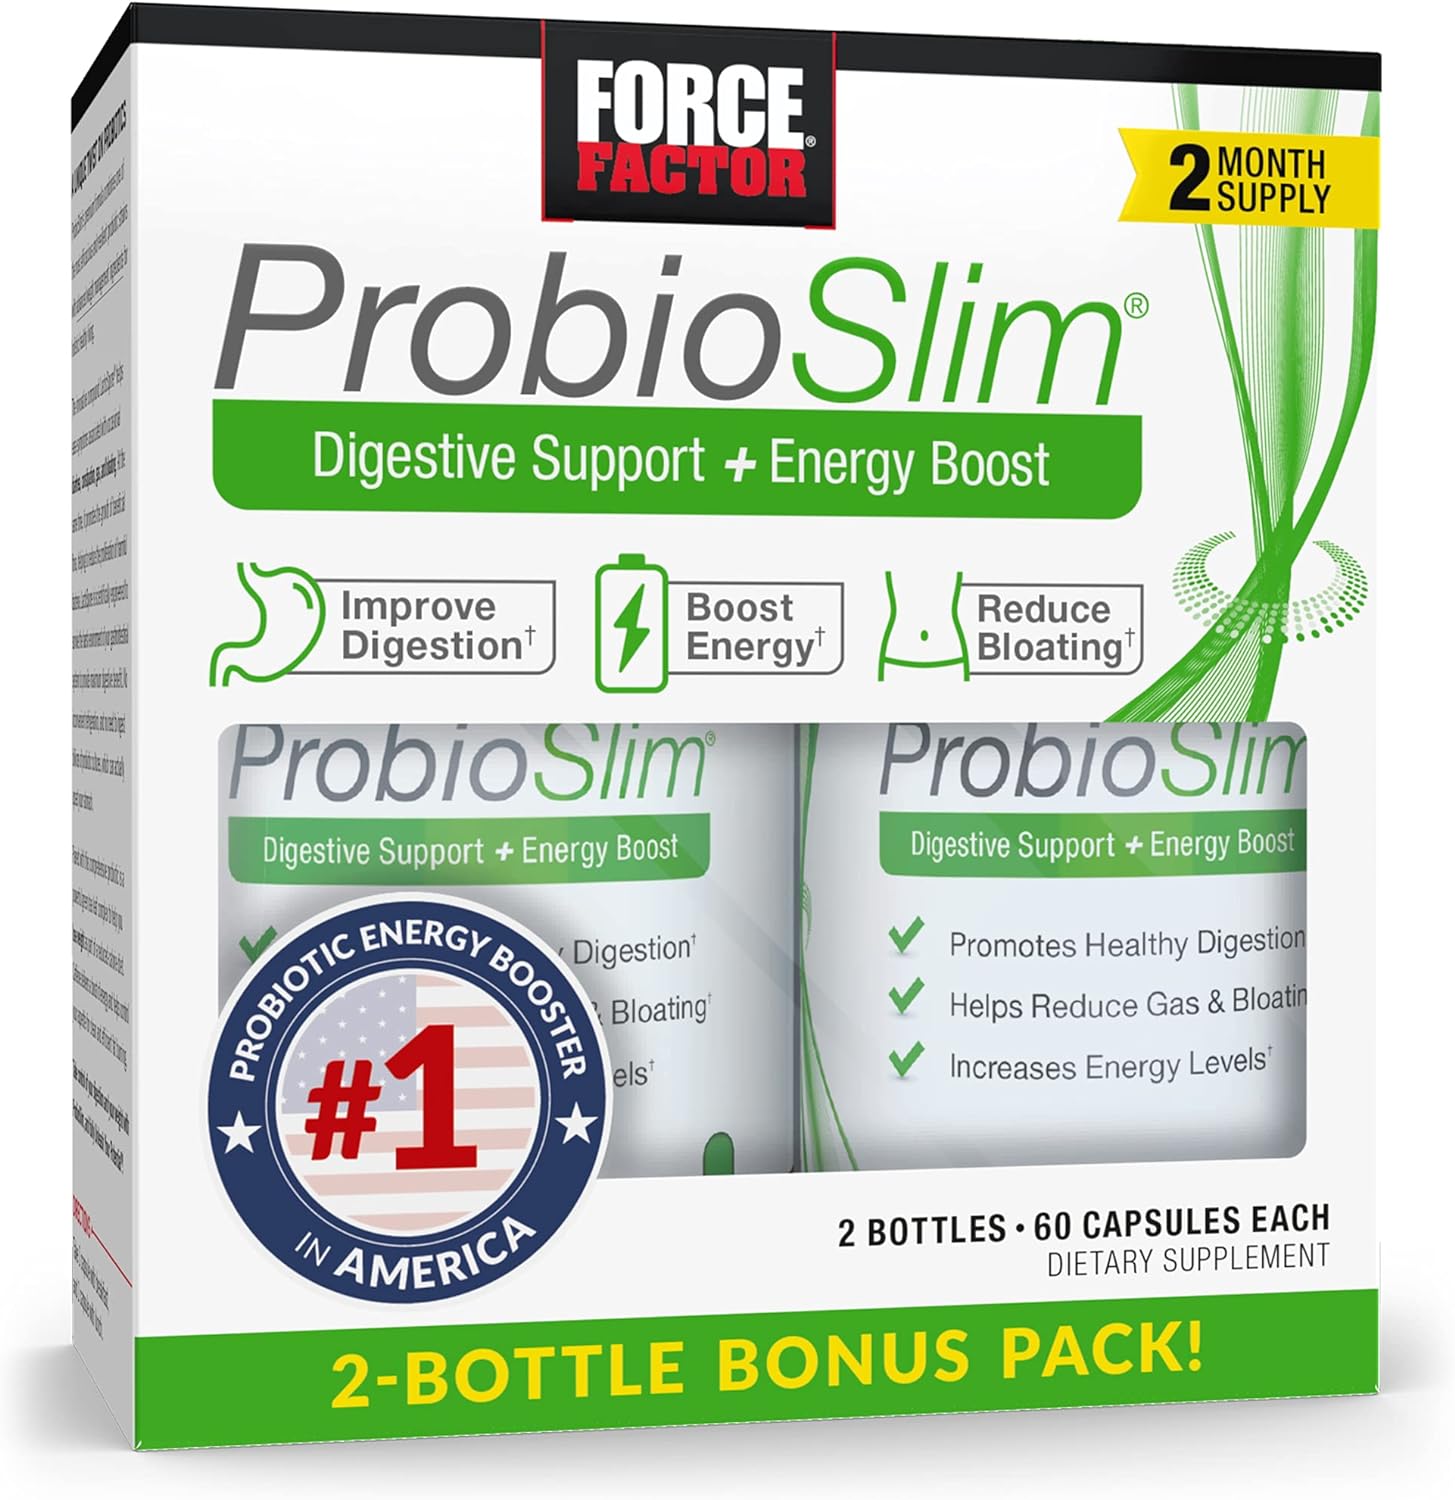 FORCE FACTOR ProbioSlim Probiotic Supplement for Women and Men with Probiotics and Green Tea Extract, Reduce Gas, Bloating, Constipation, Support Digestive and Gut Health, 120 Capsules (Twin Pack)